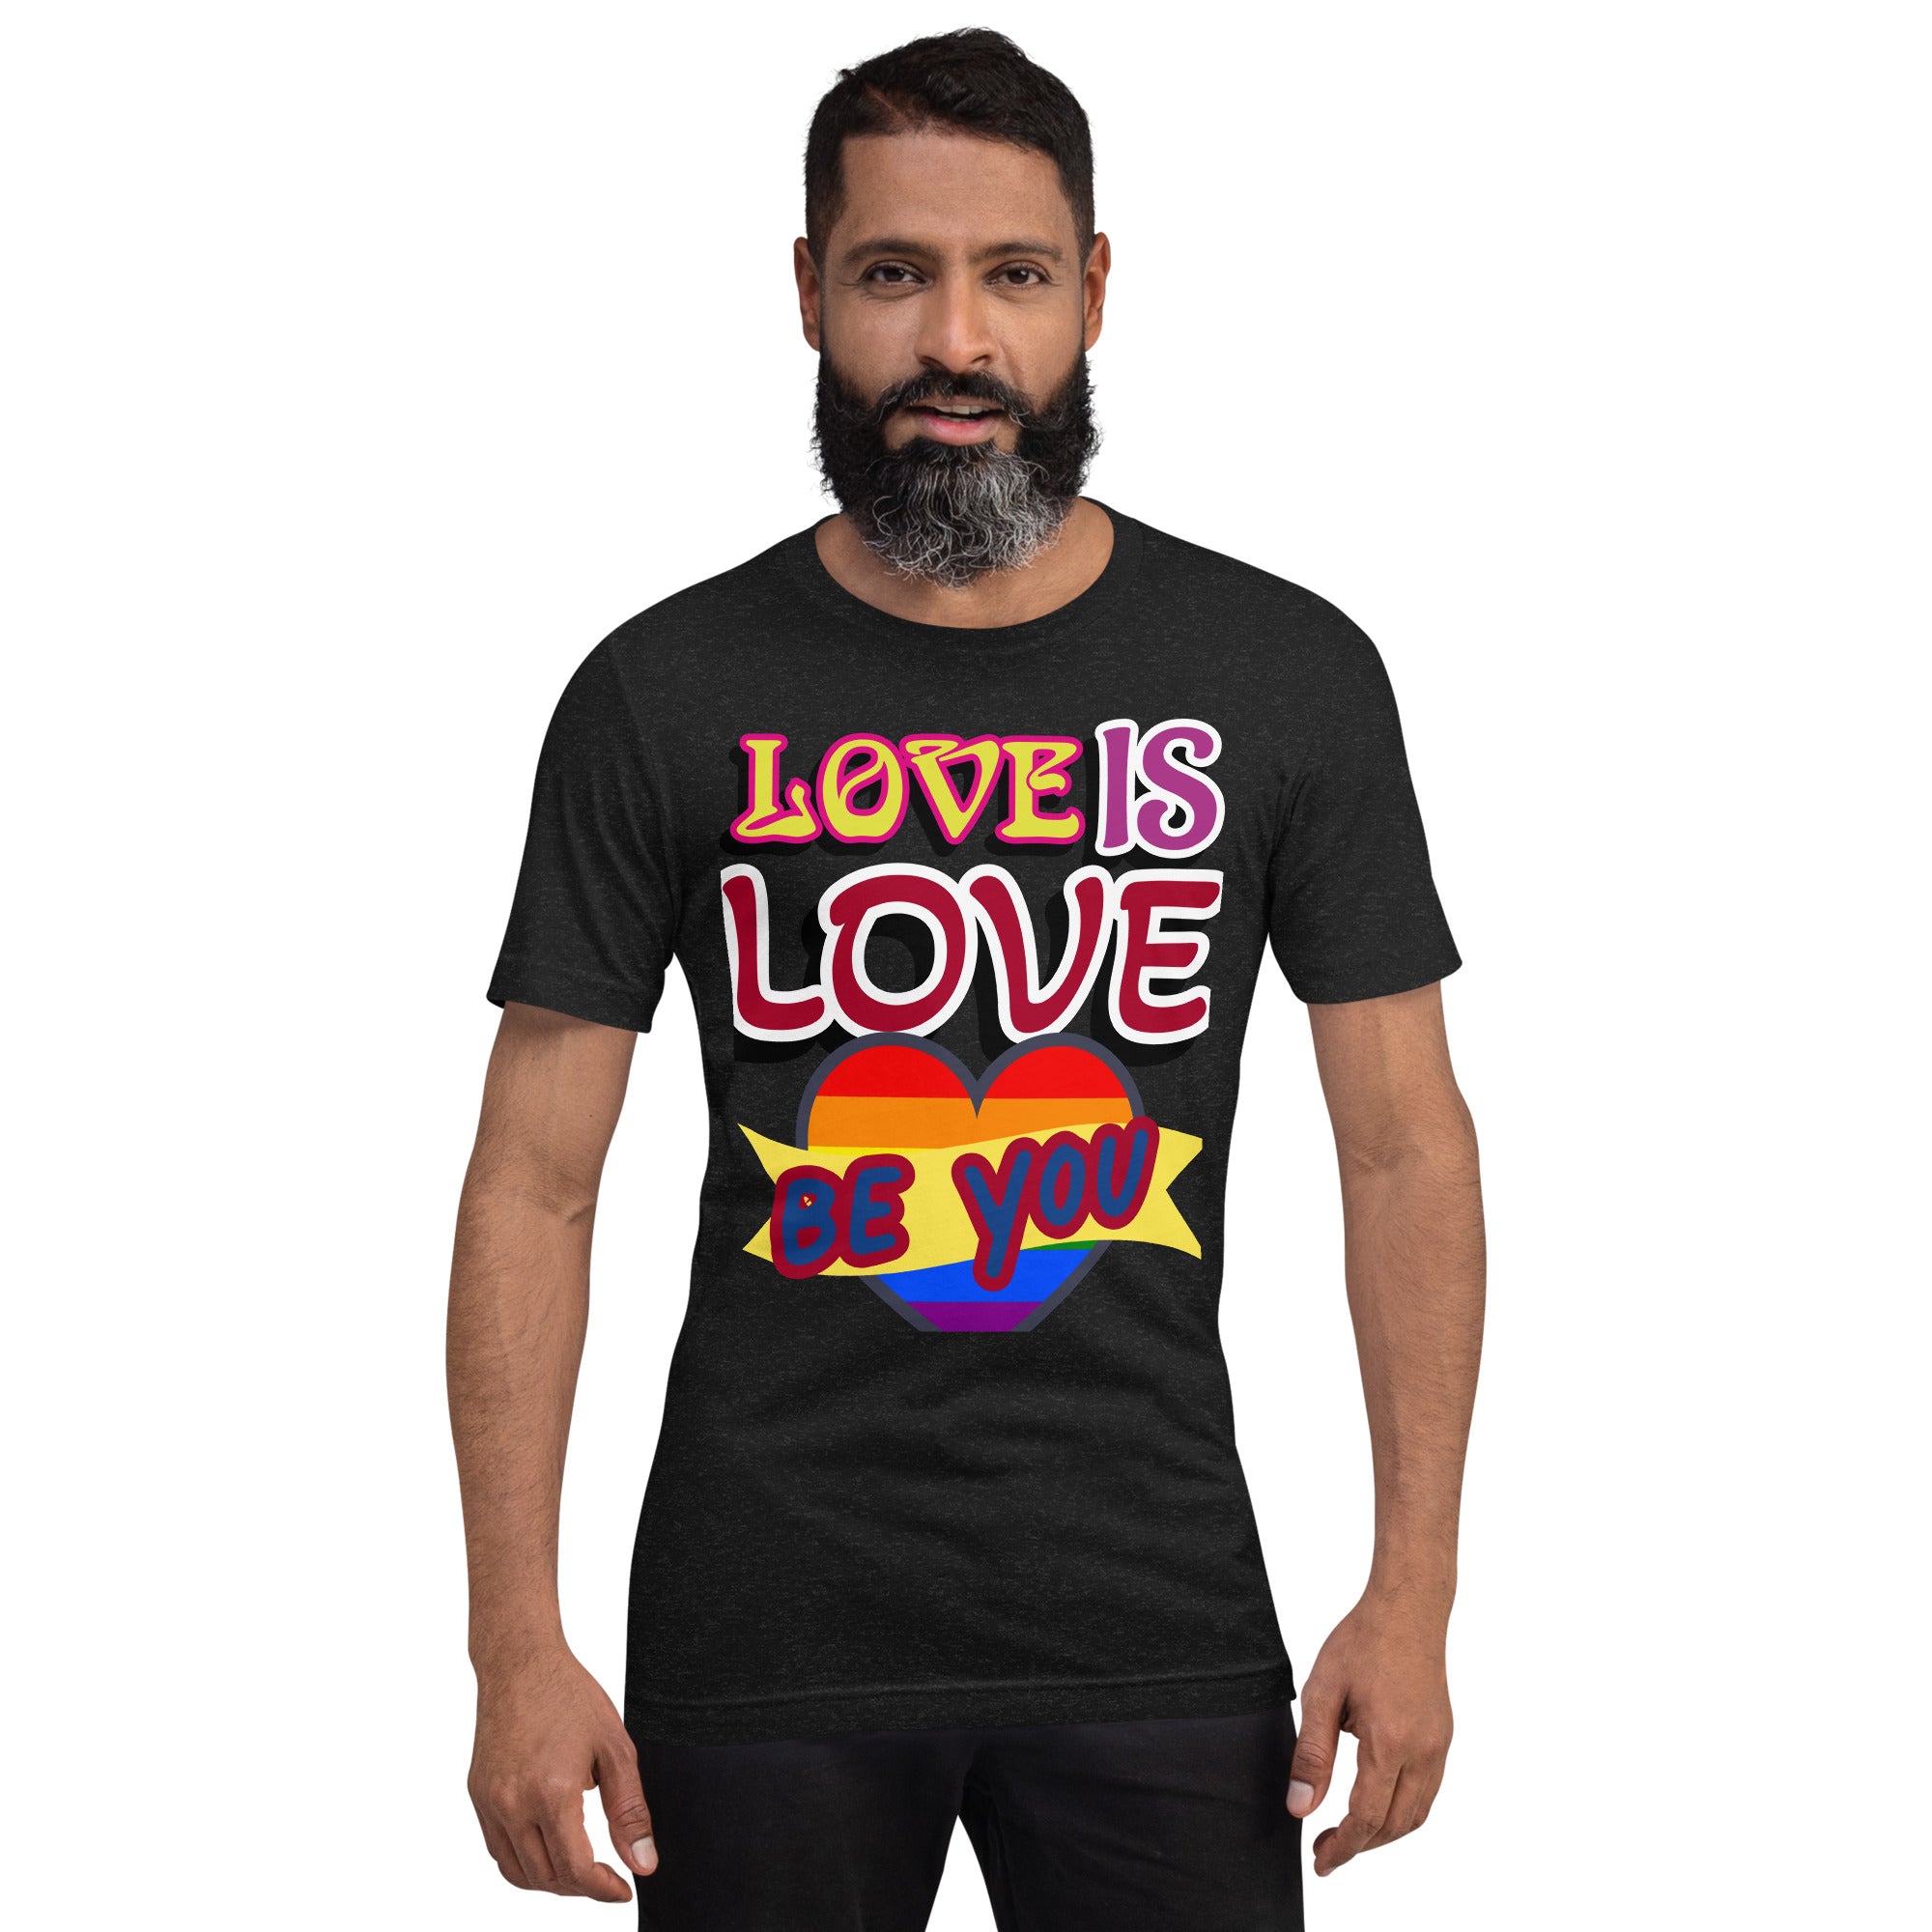 Unisex T-Shirts, Love is Love T shirt, everyday T shirt, Gift, 100% Cotton